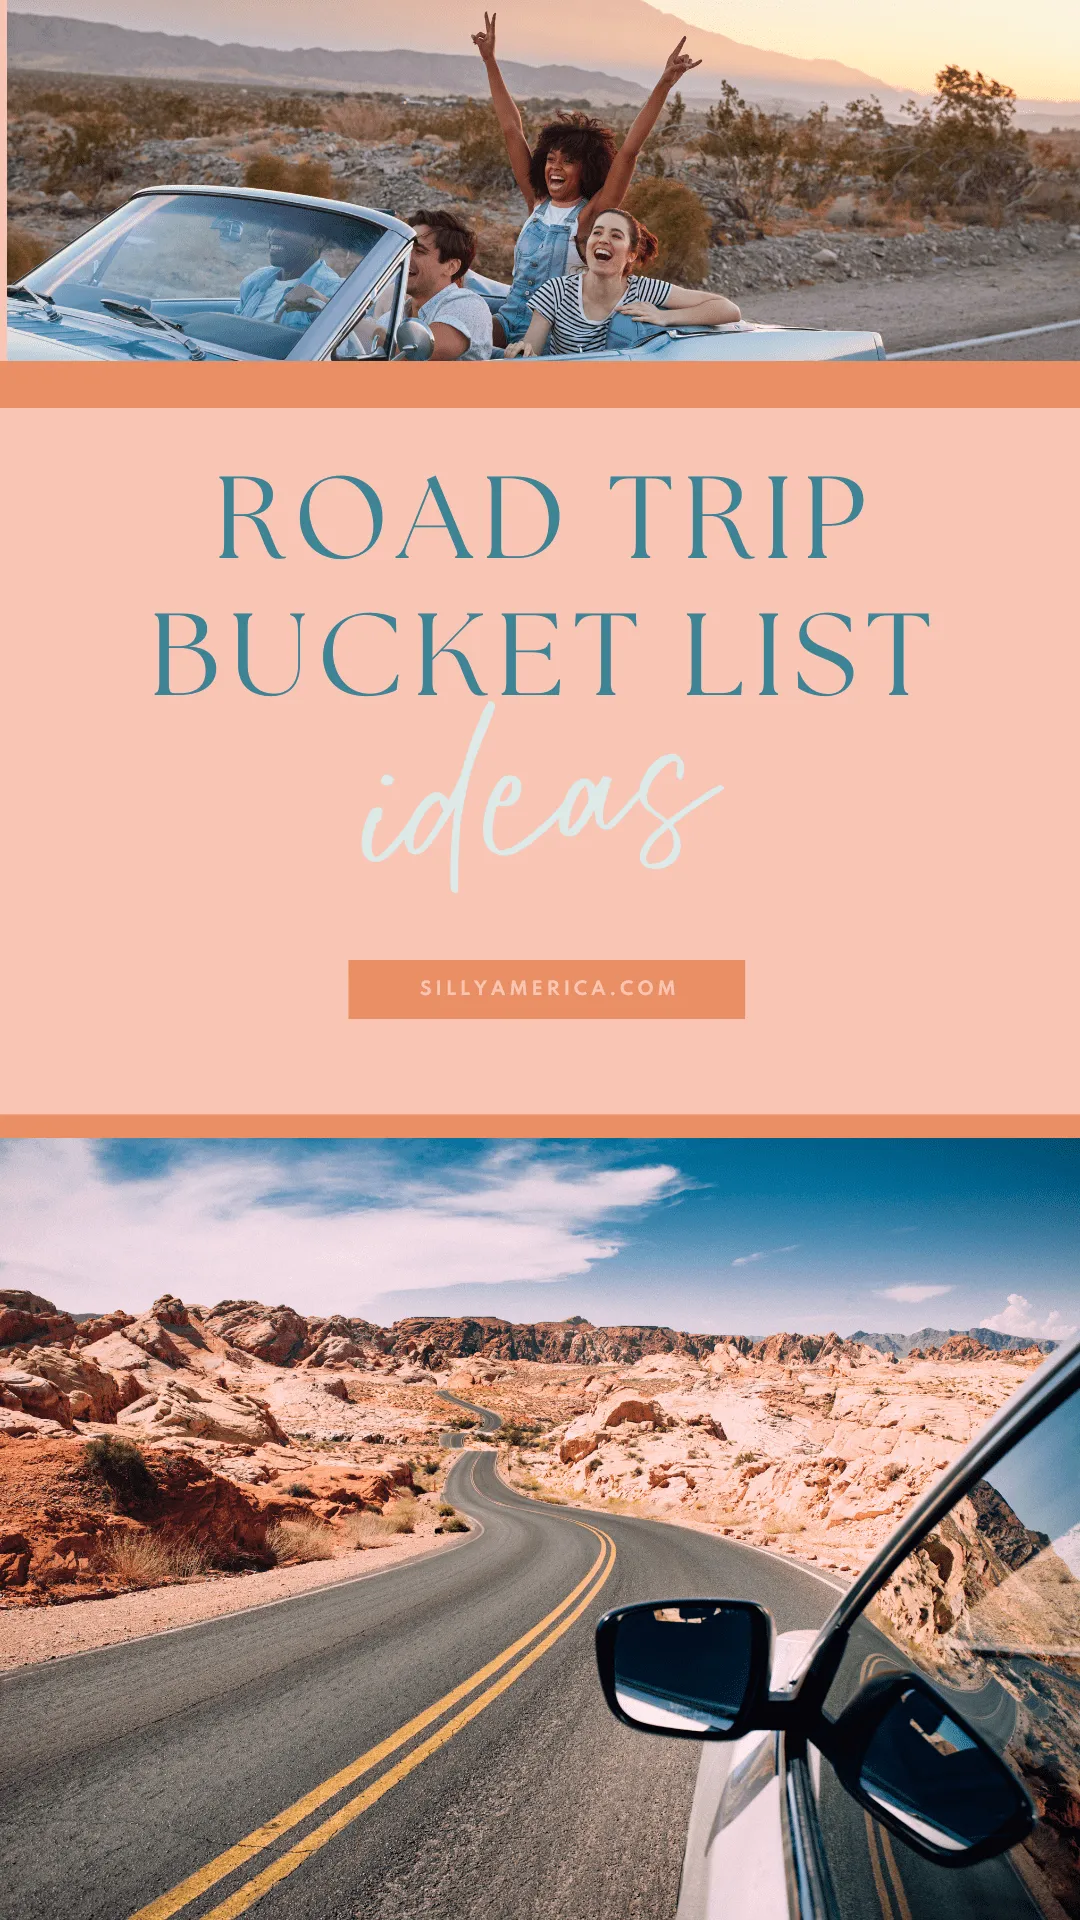 What's on your road trip bucket list? Whether you're looking to build the perfect road trip itinerary or want to craft a travel bucket list full of the most special road trip experiences, we've crafted lists of some of the best road trip bucket list ideas. Find the best road trip bucket list experiences, save the images for inspiration, and download our printable PDF checklists to keep track of everything you check off your life list! #RoadTrip #RoadTripBucketList #BucketListIdeas #BucketList